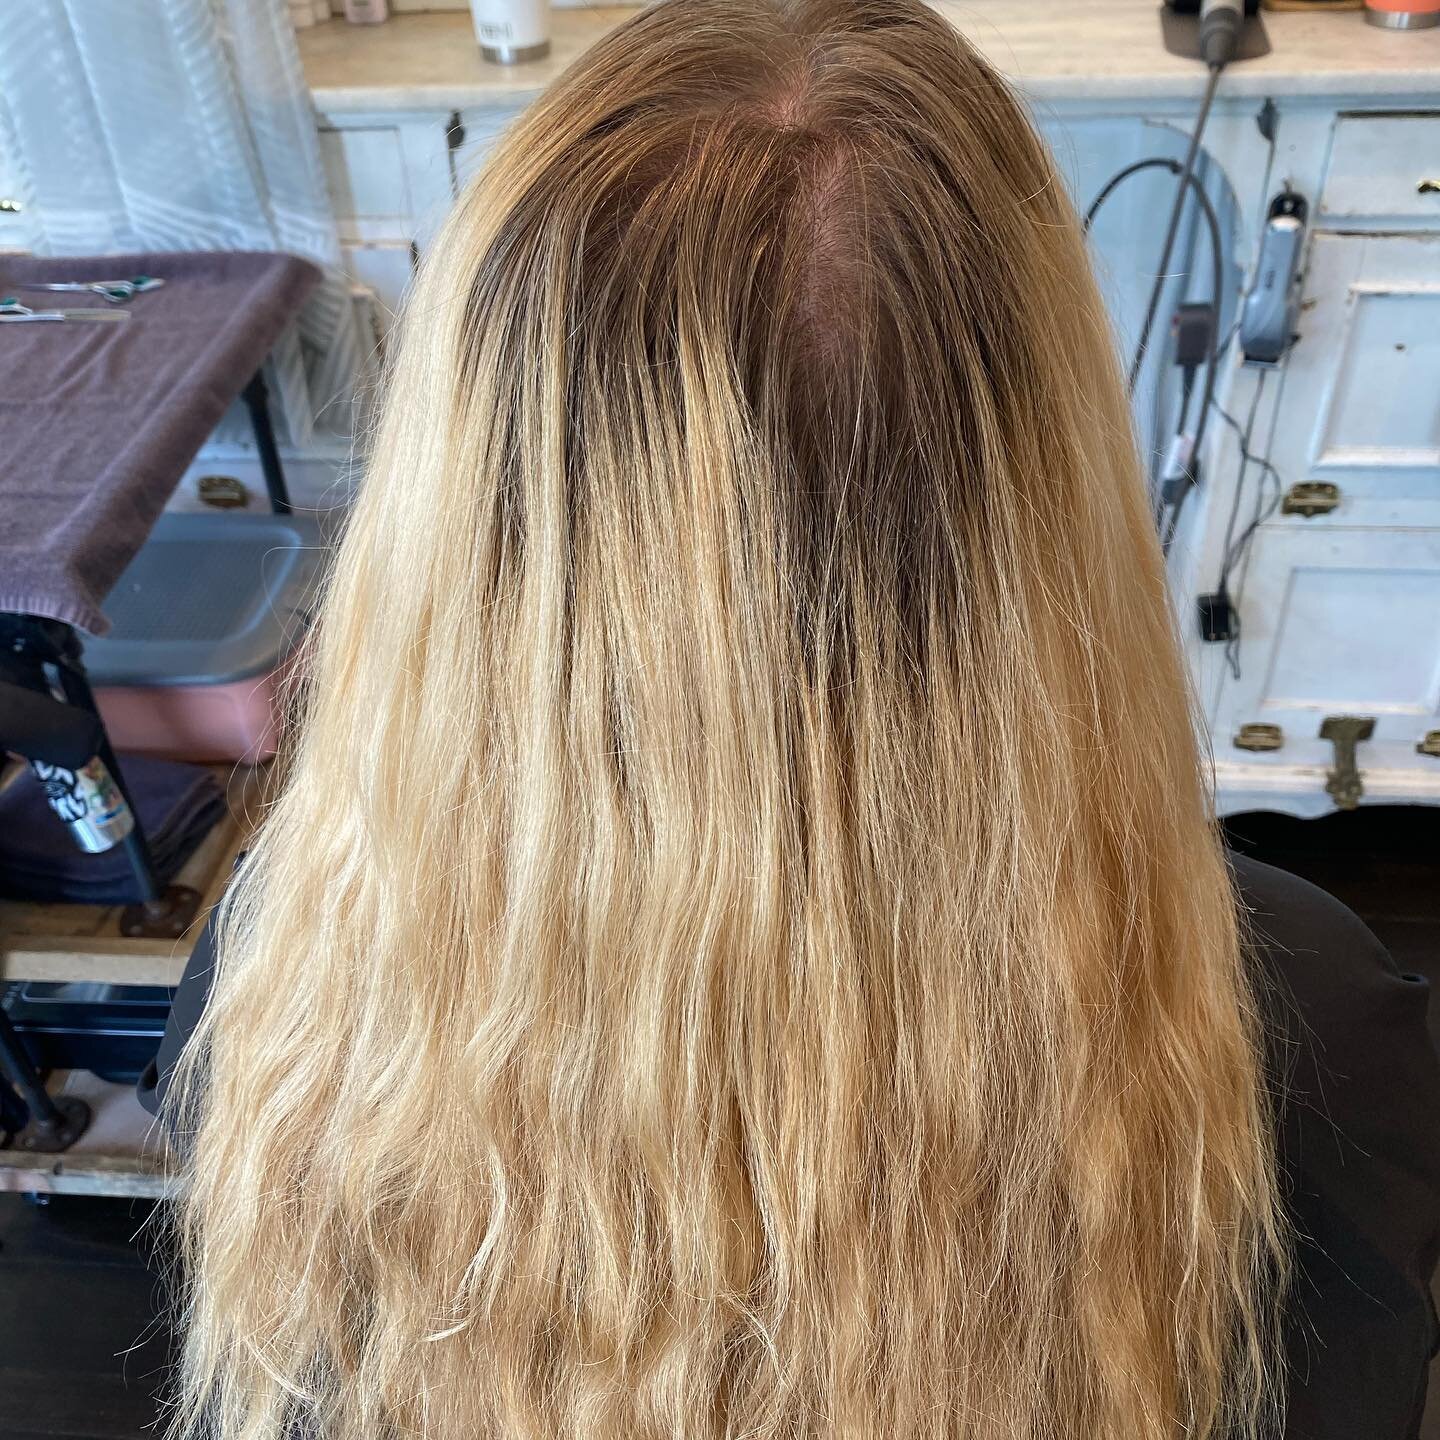 Can you believe we didn&rsquo;t use any lightener?! 😍 Thanks @raejames 
🐌
🐌
🐌
#owayorganics #oway #blonde #haircolor #evo #evostyling #evostylingproducts